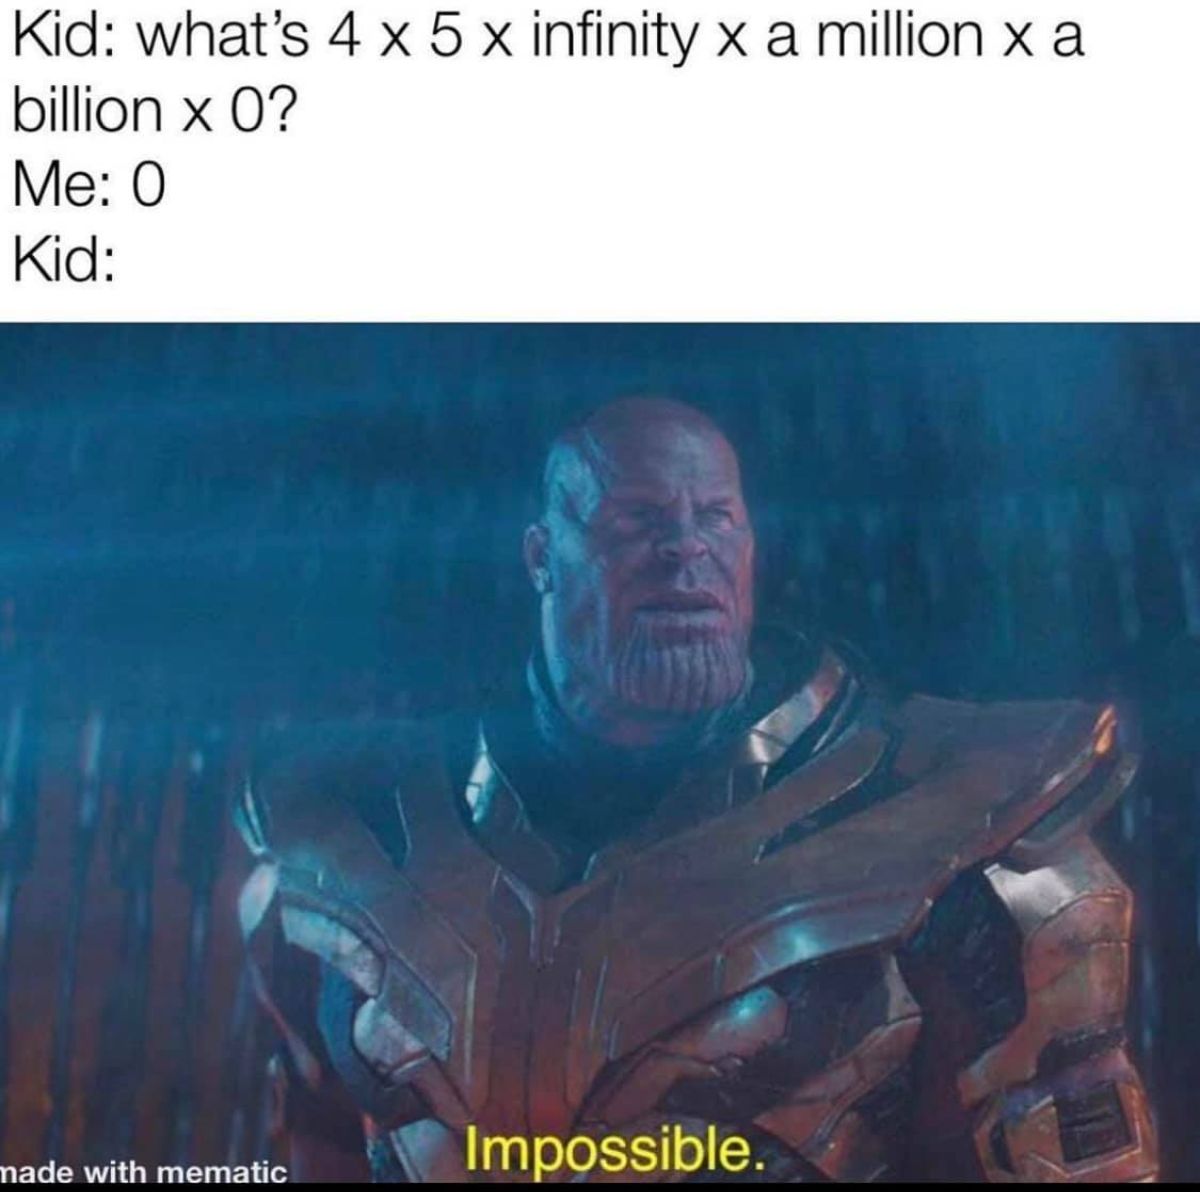 thanos impossible meme - Kid what's 4 x 5 x infinity x a million x a billion x 0? Me 0 Kid made with mematic Impossible.